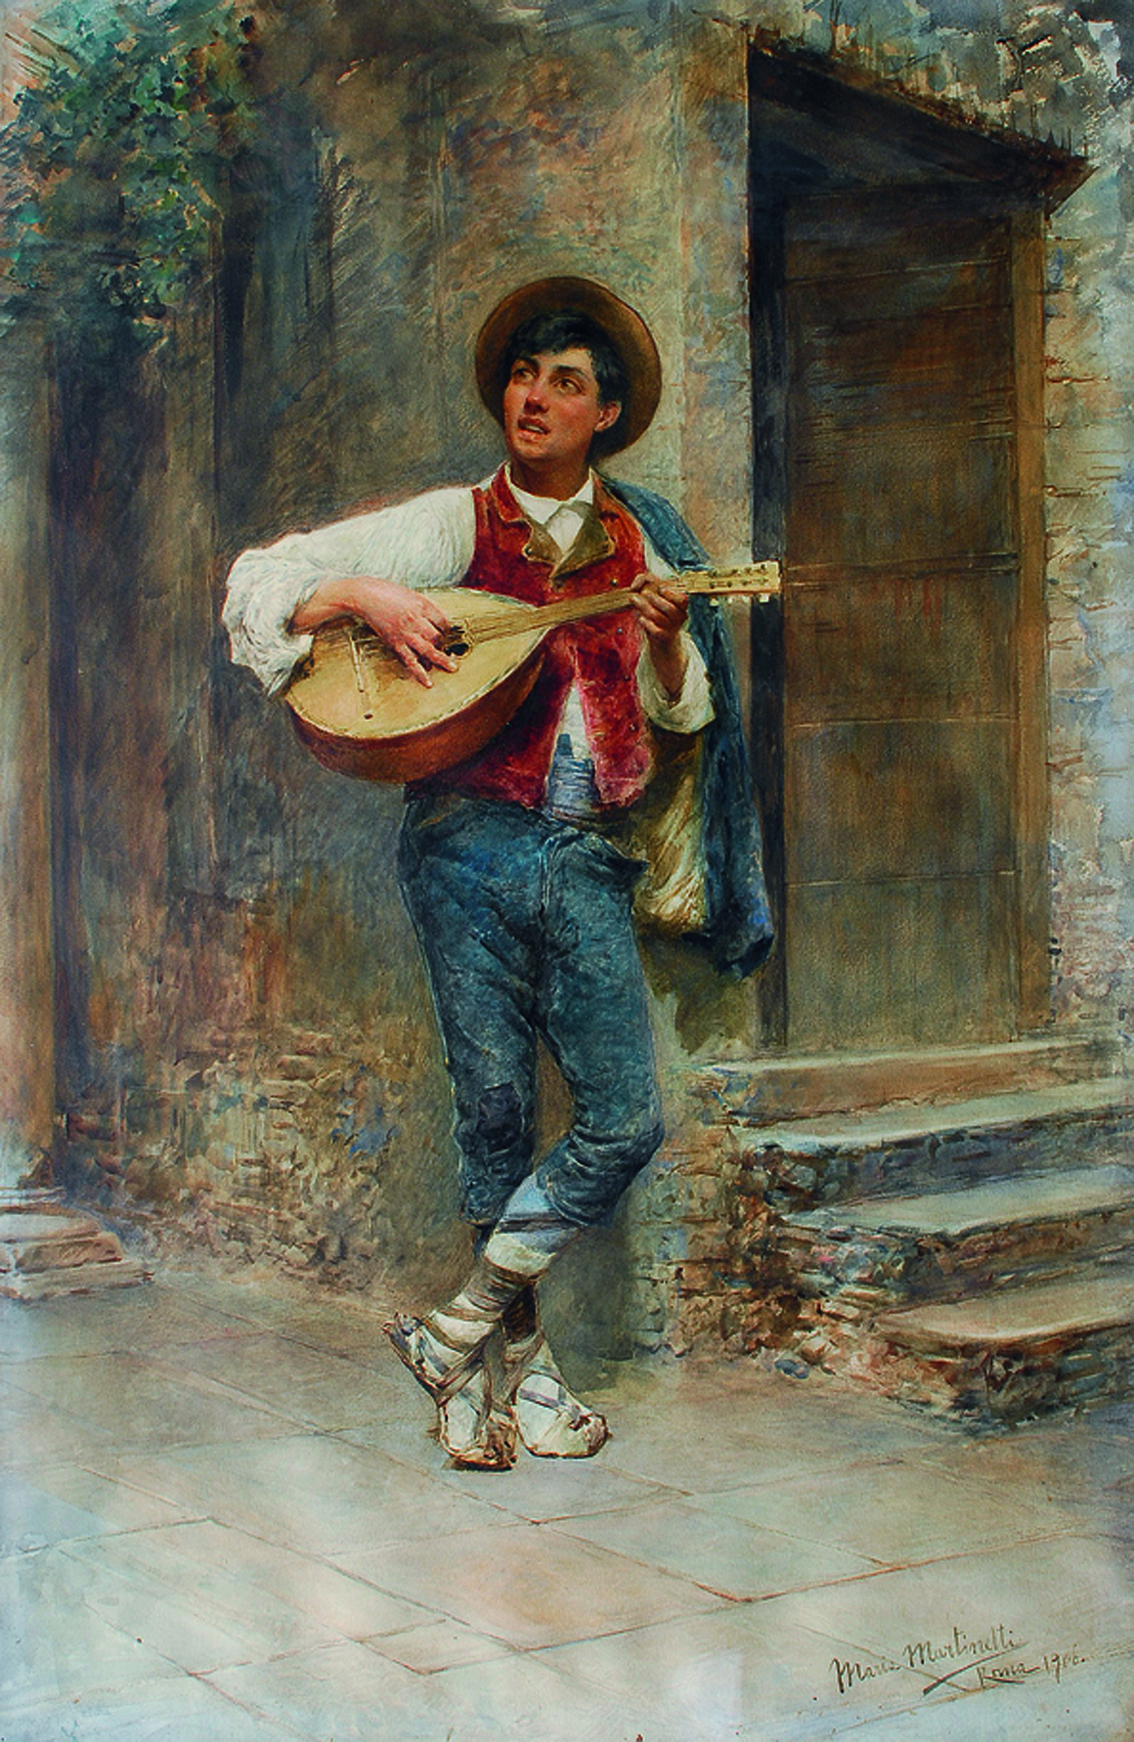 A young lute player